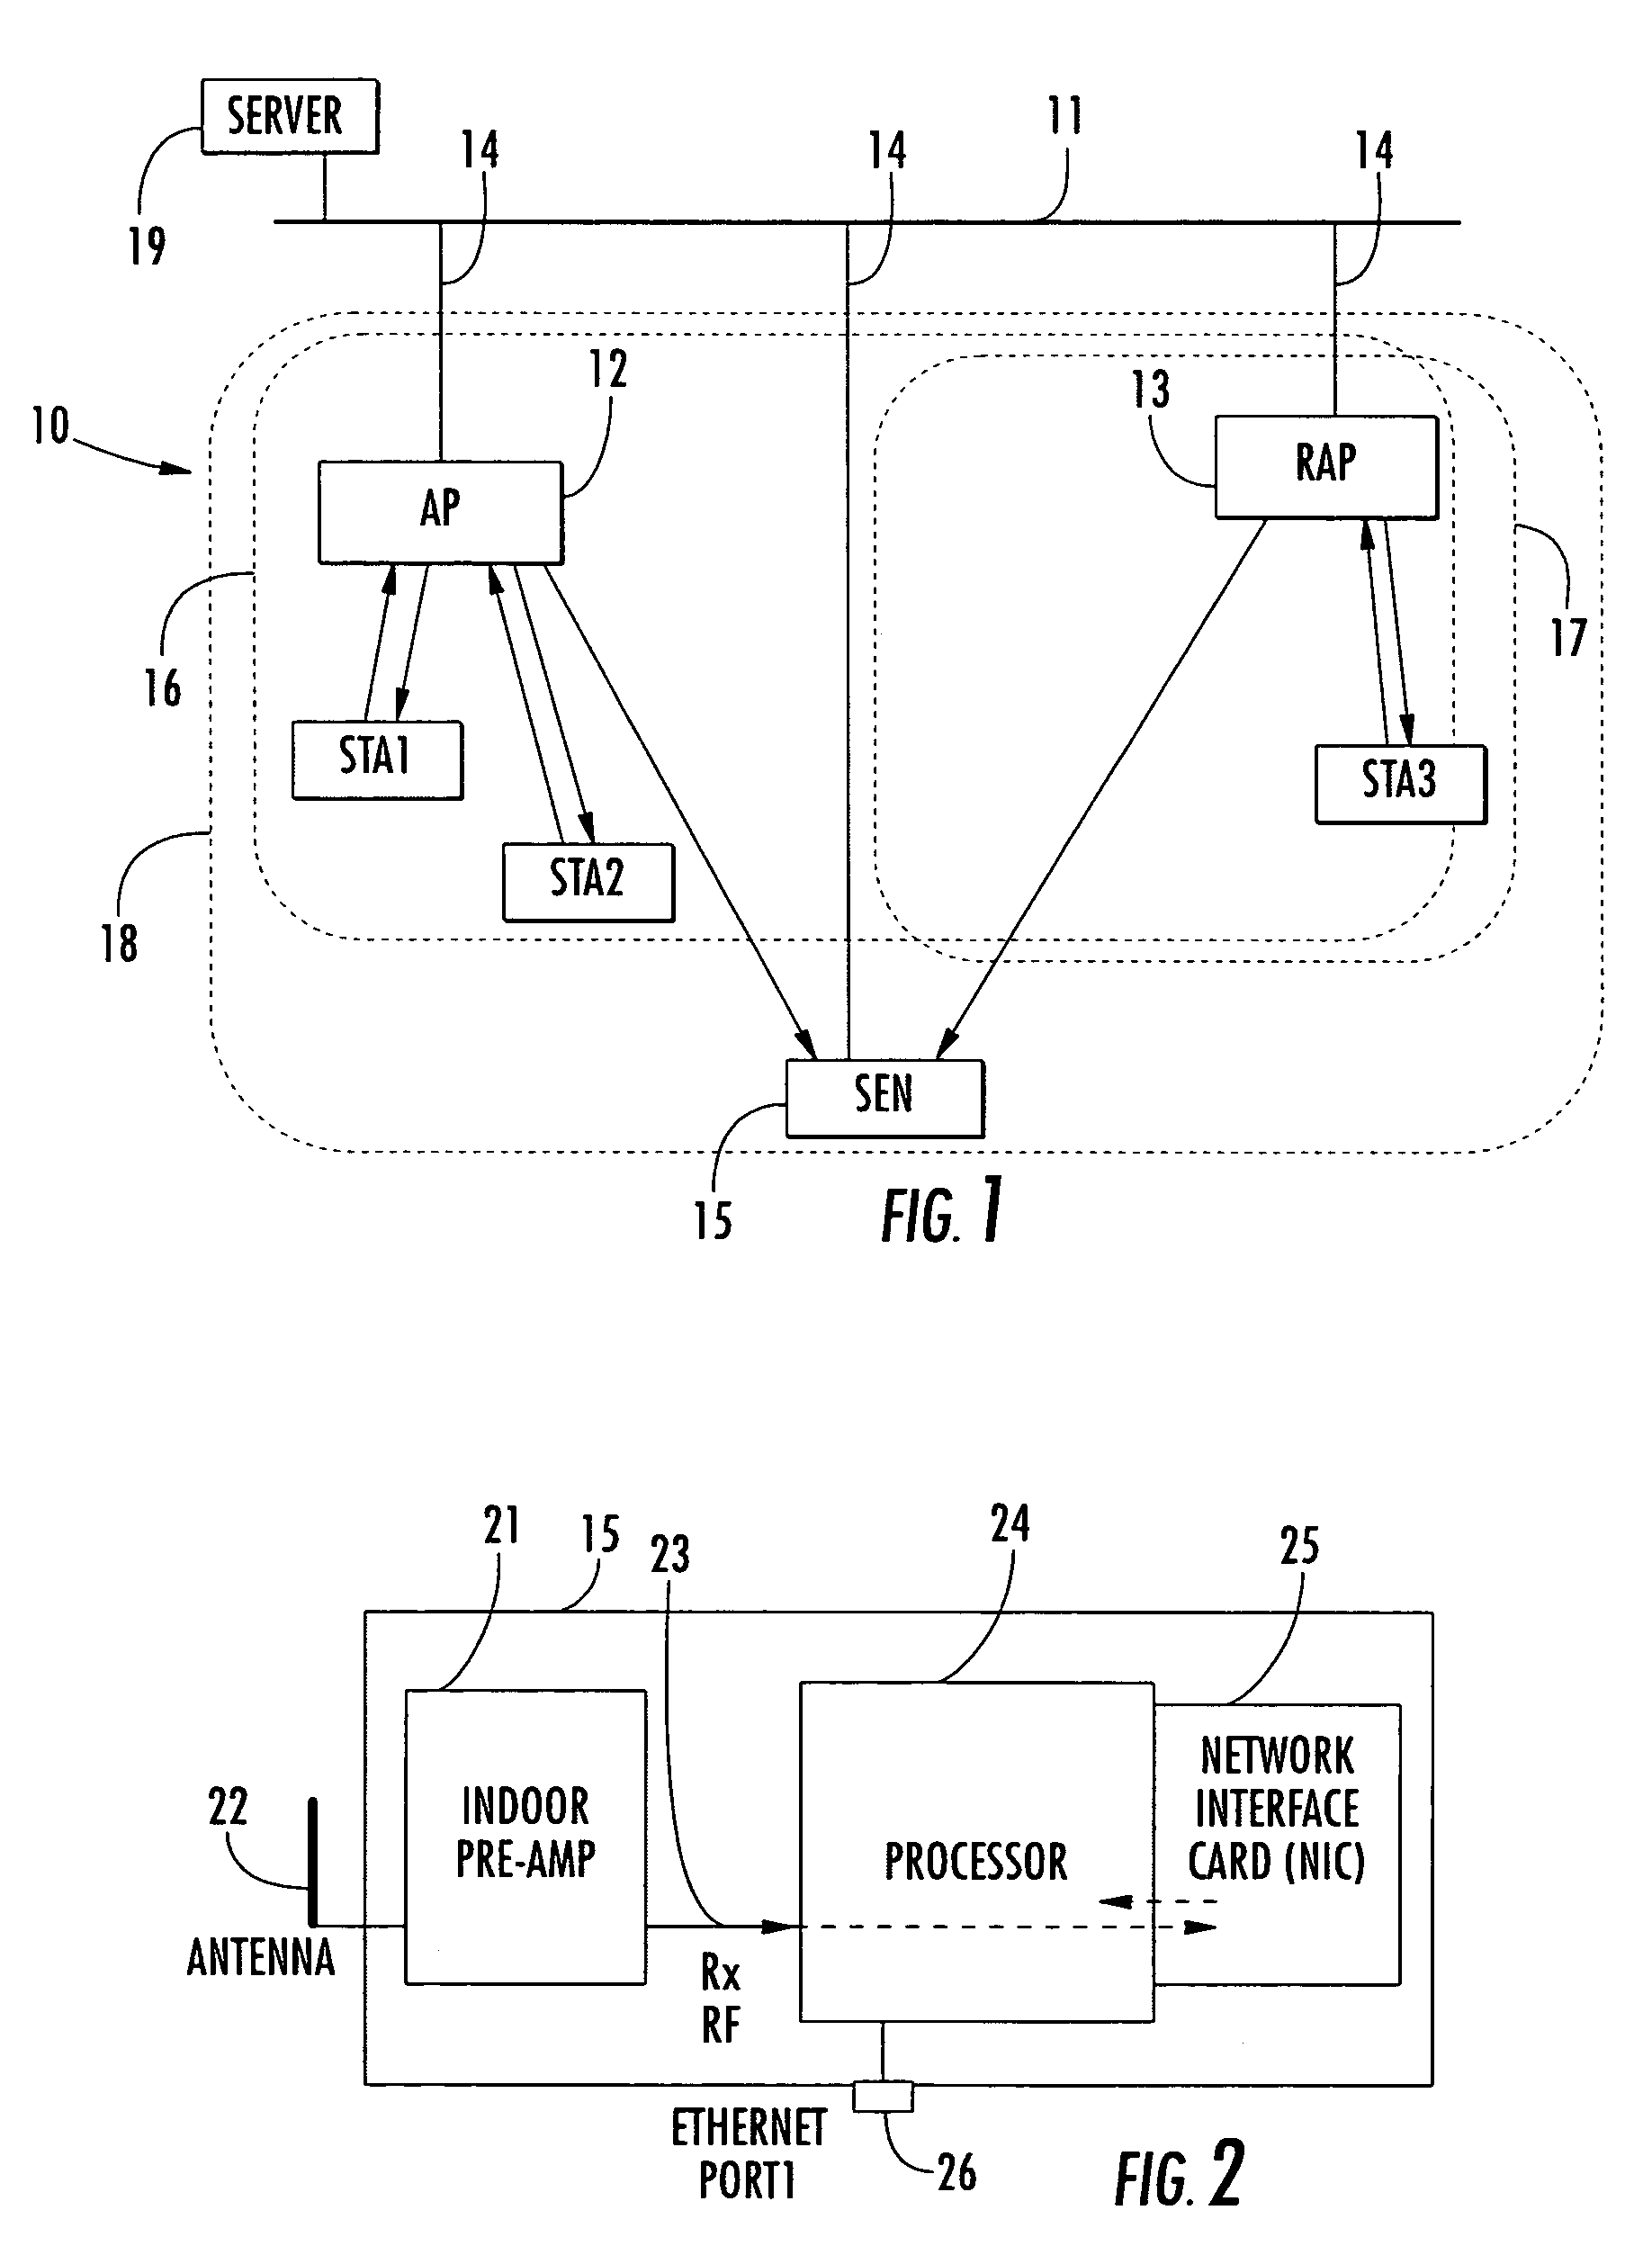 Device and method for detecting unauthorized, "rogue" wireless LAN access points